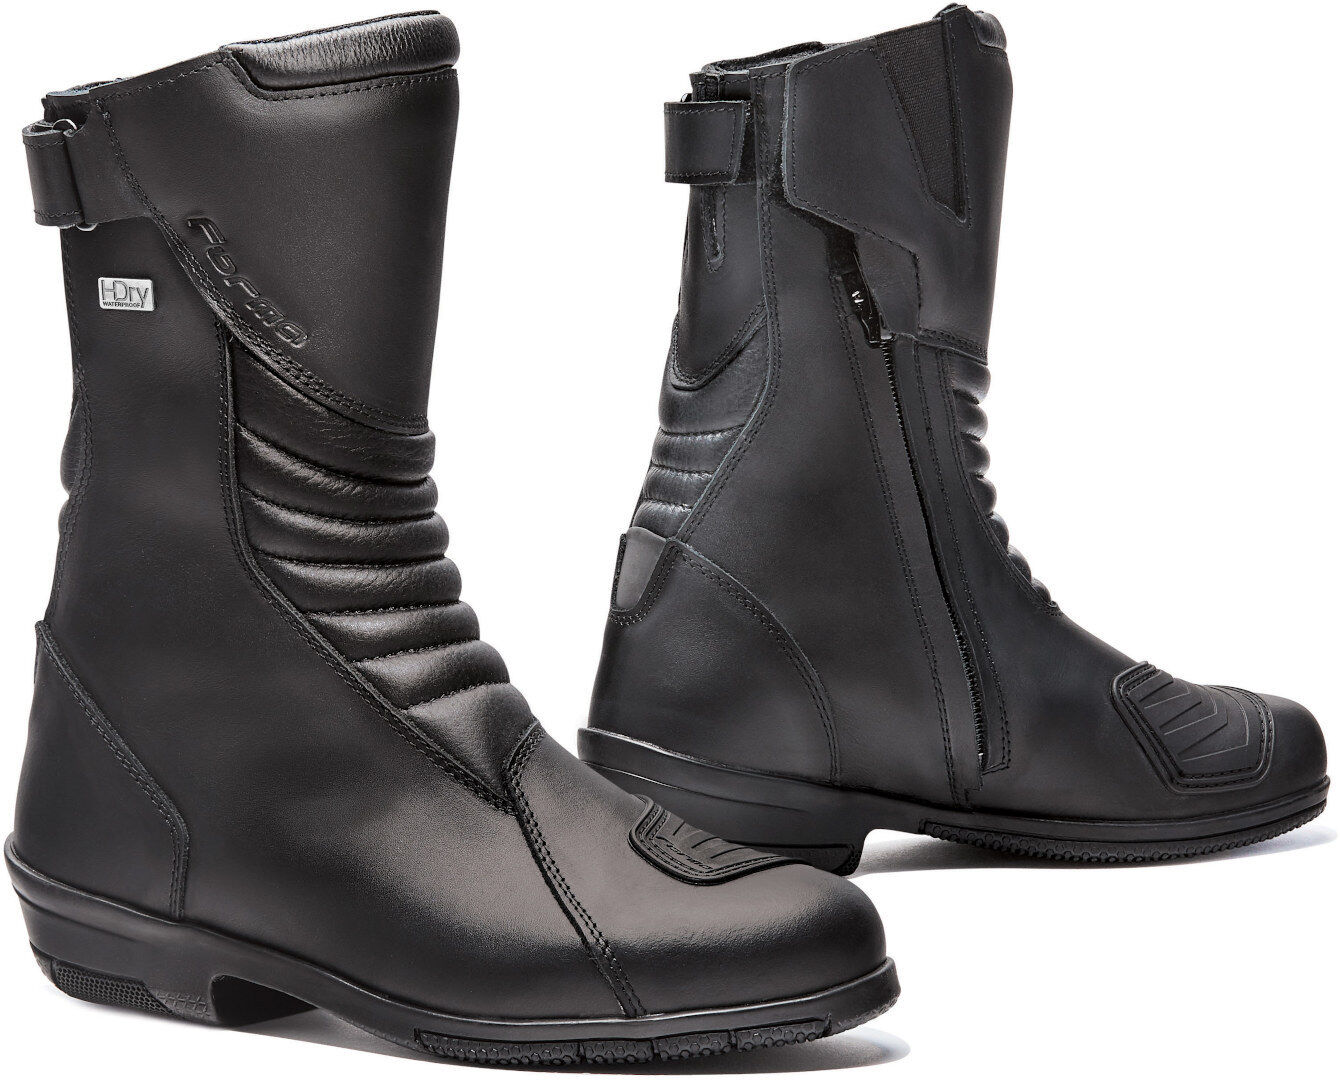 Photos - Motorcycle Boots Forma Rose Hdry Ladies  Female Black Size: 38 fort105w9938 